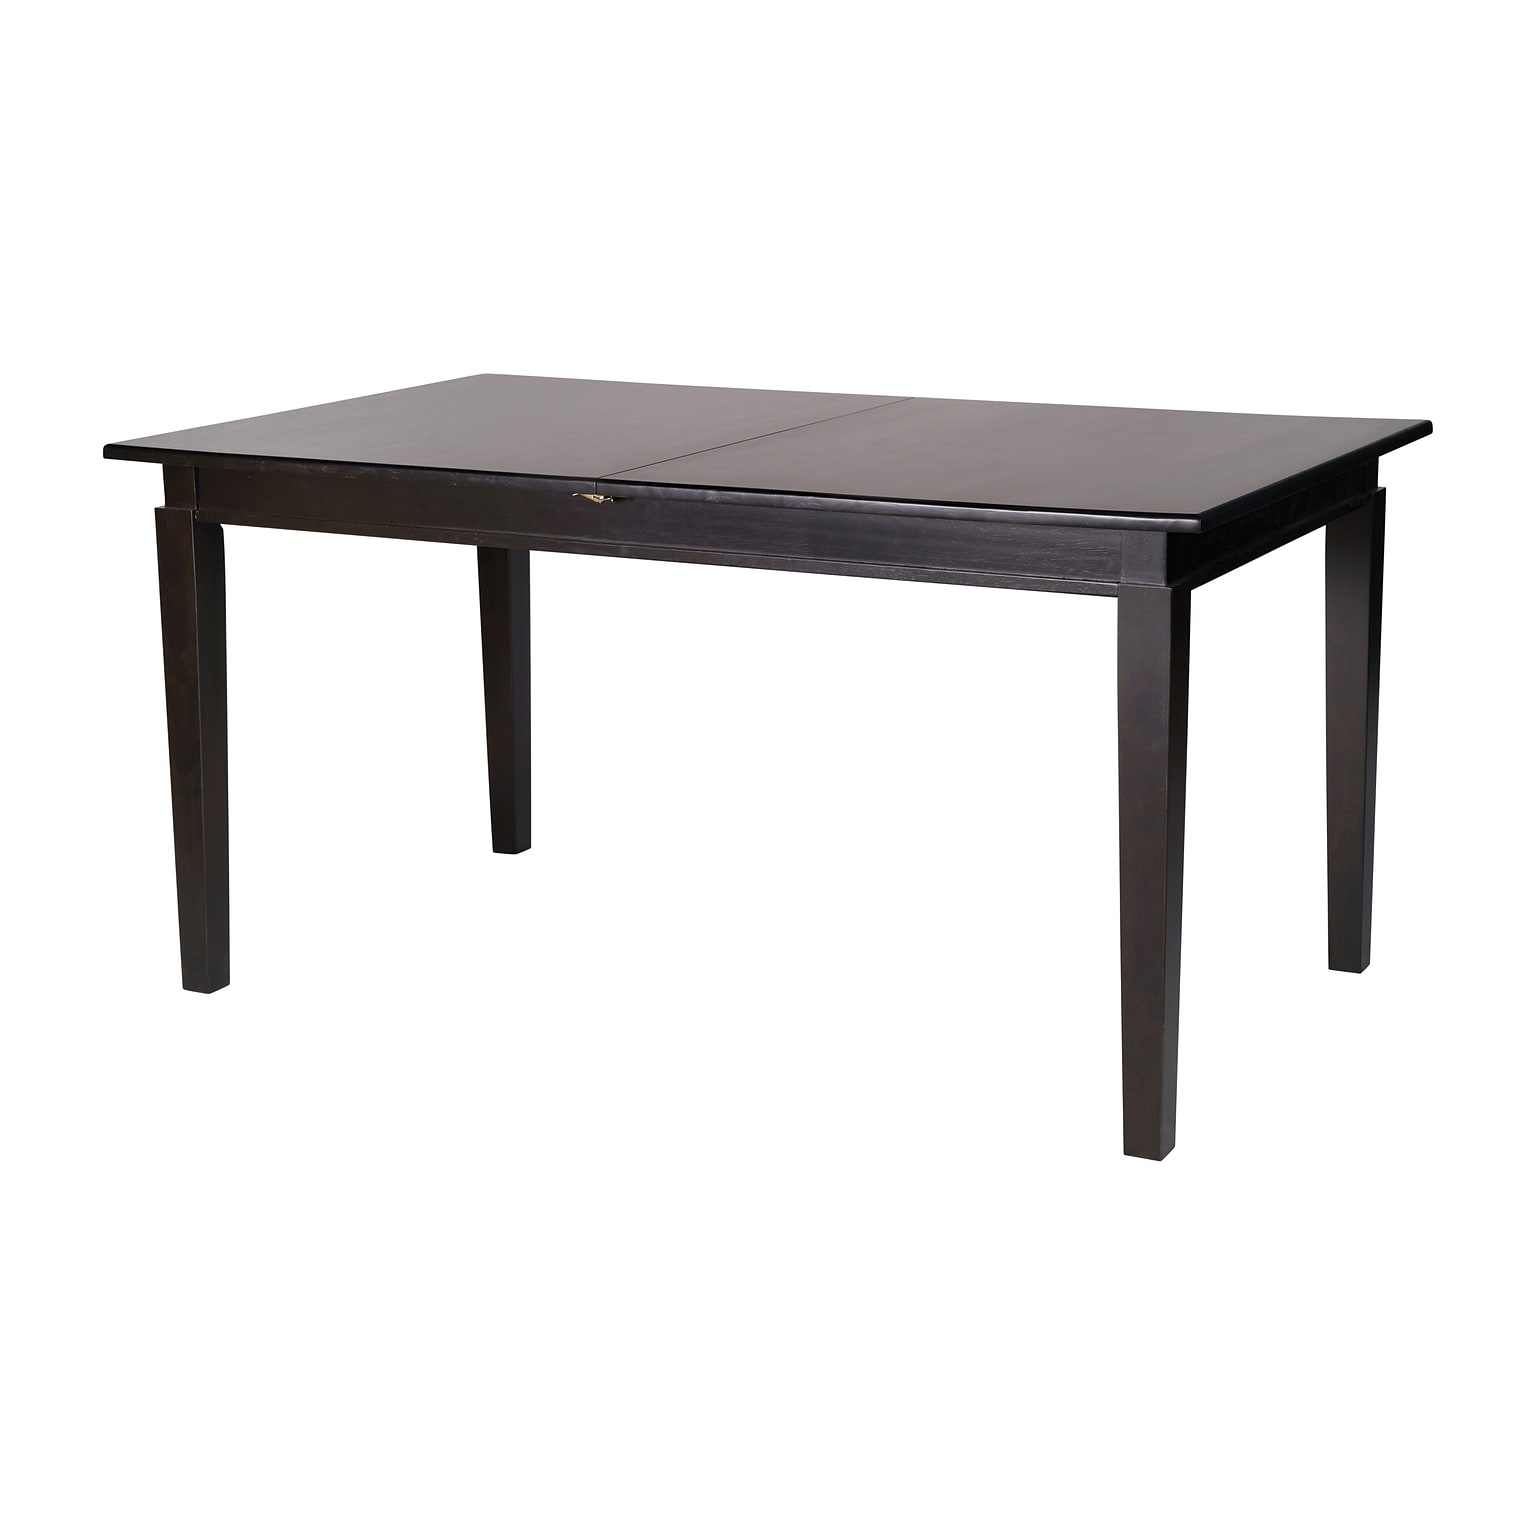 Flash Furniture Henry Wooden Dining Table with Extension Panel, 36 x 72, Matte Black (KERT217EXBLK72)